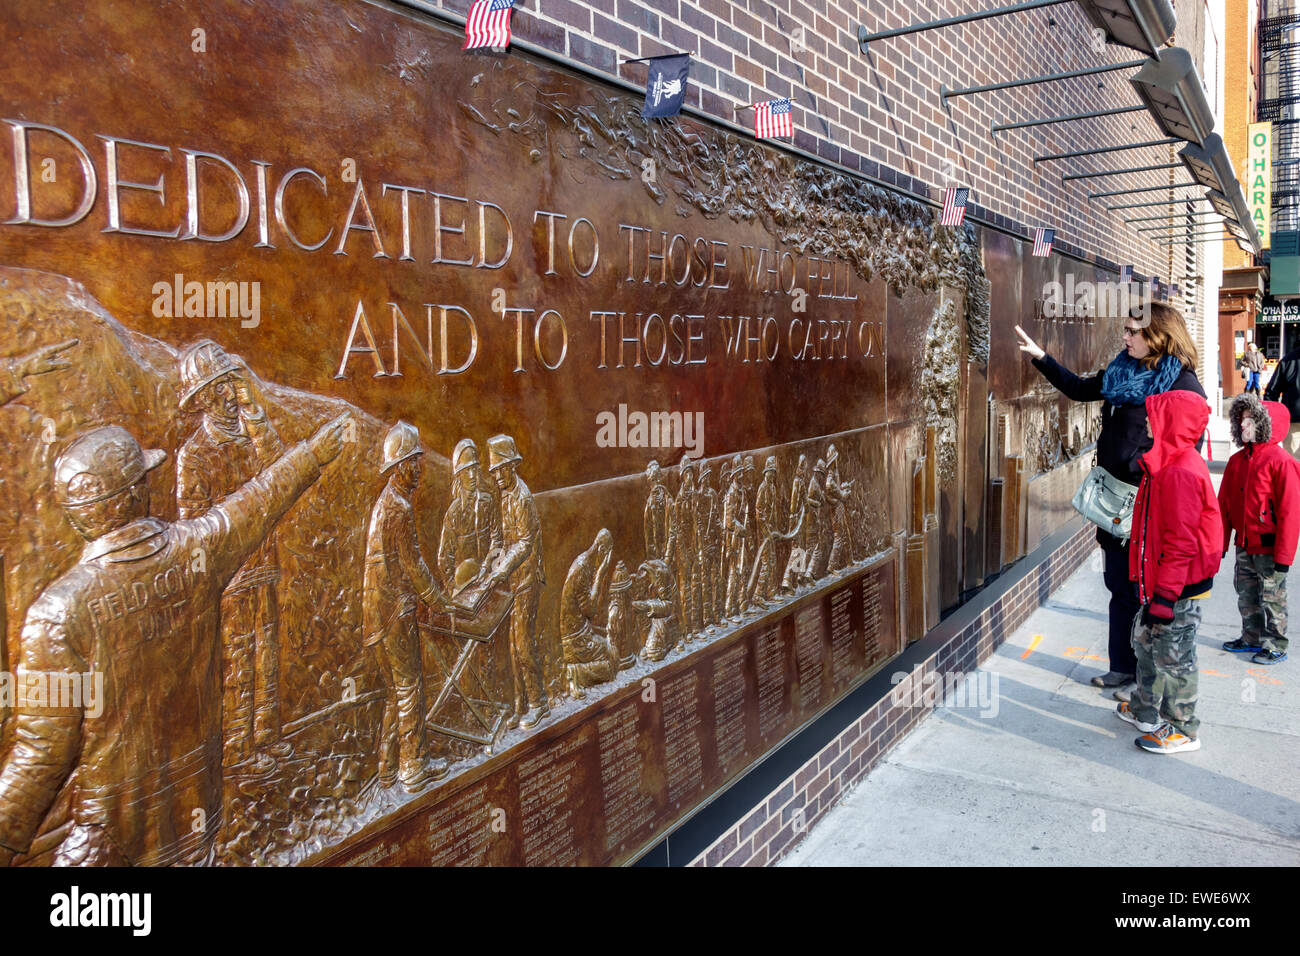 New York City,NY NYC,Manhattan,Lower,Financial District,National September 11 Memorial & Museum,911 9/11,plaza,pools,bronze mural relief plaque,firema Stock Photo